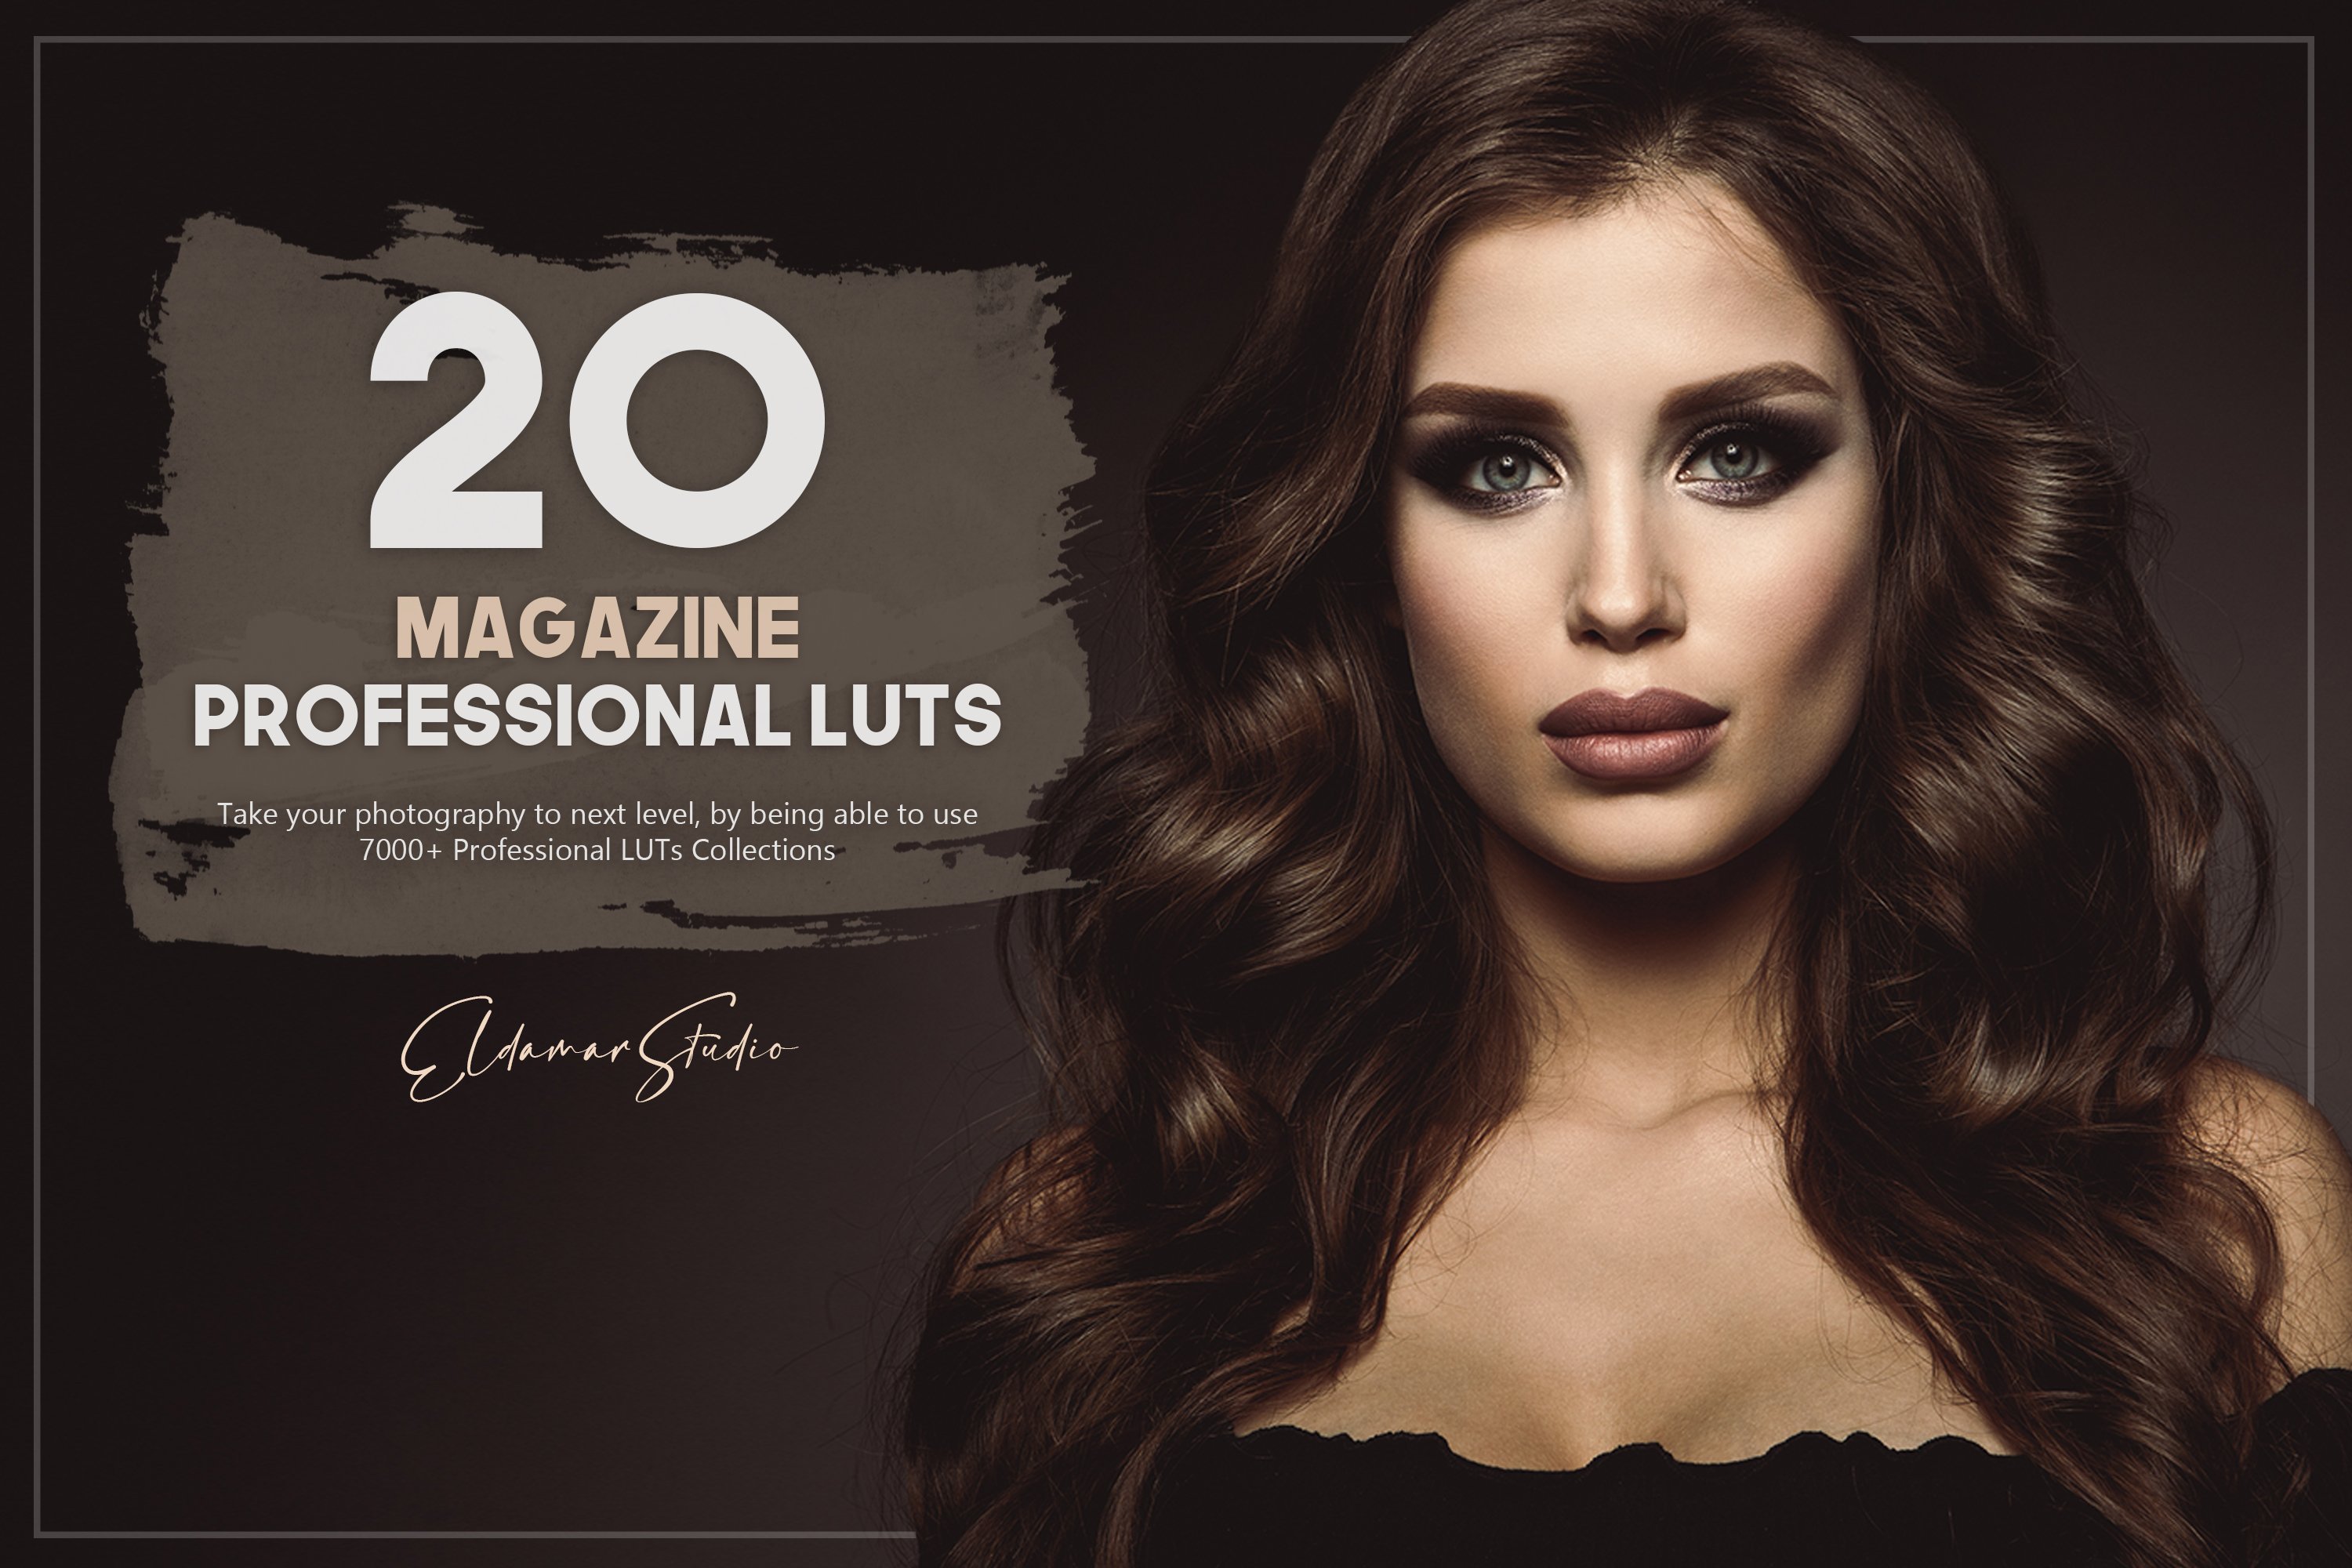 20 Magazine LUTs Packcover image.